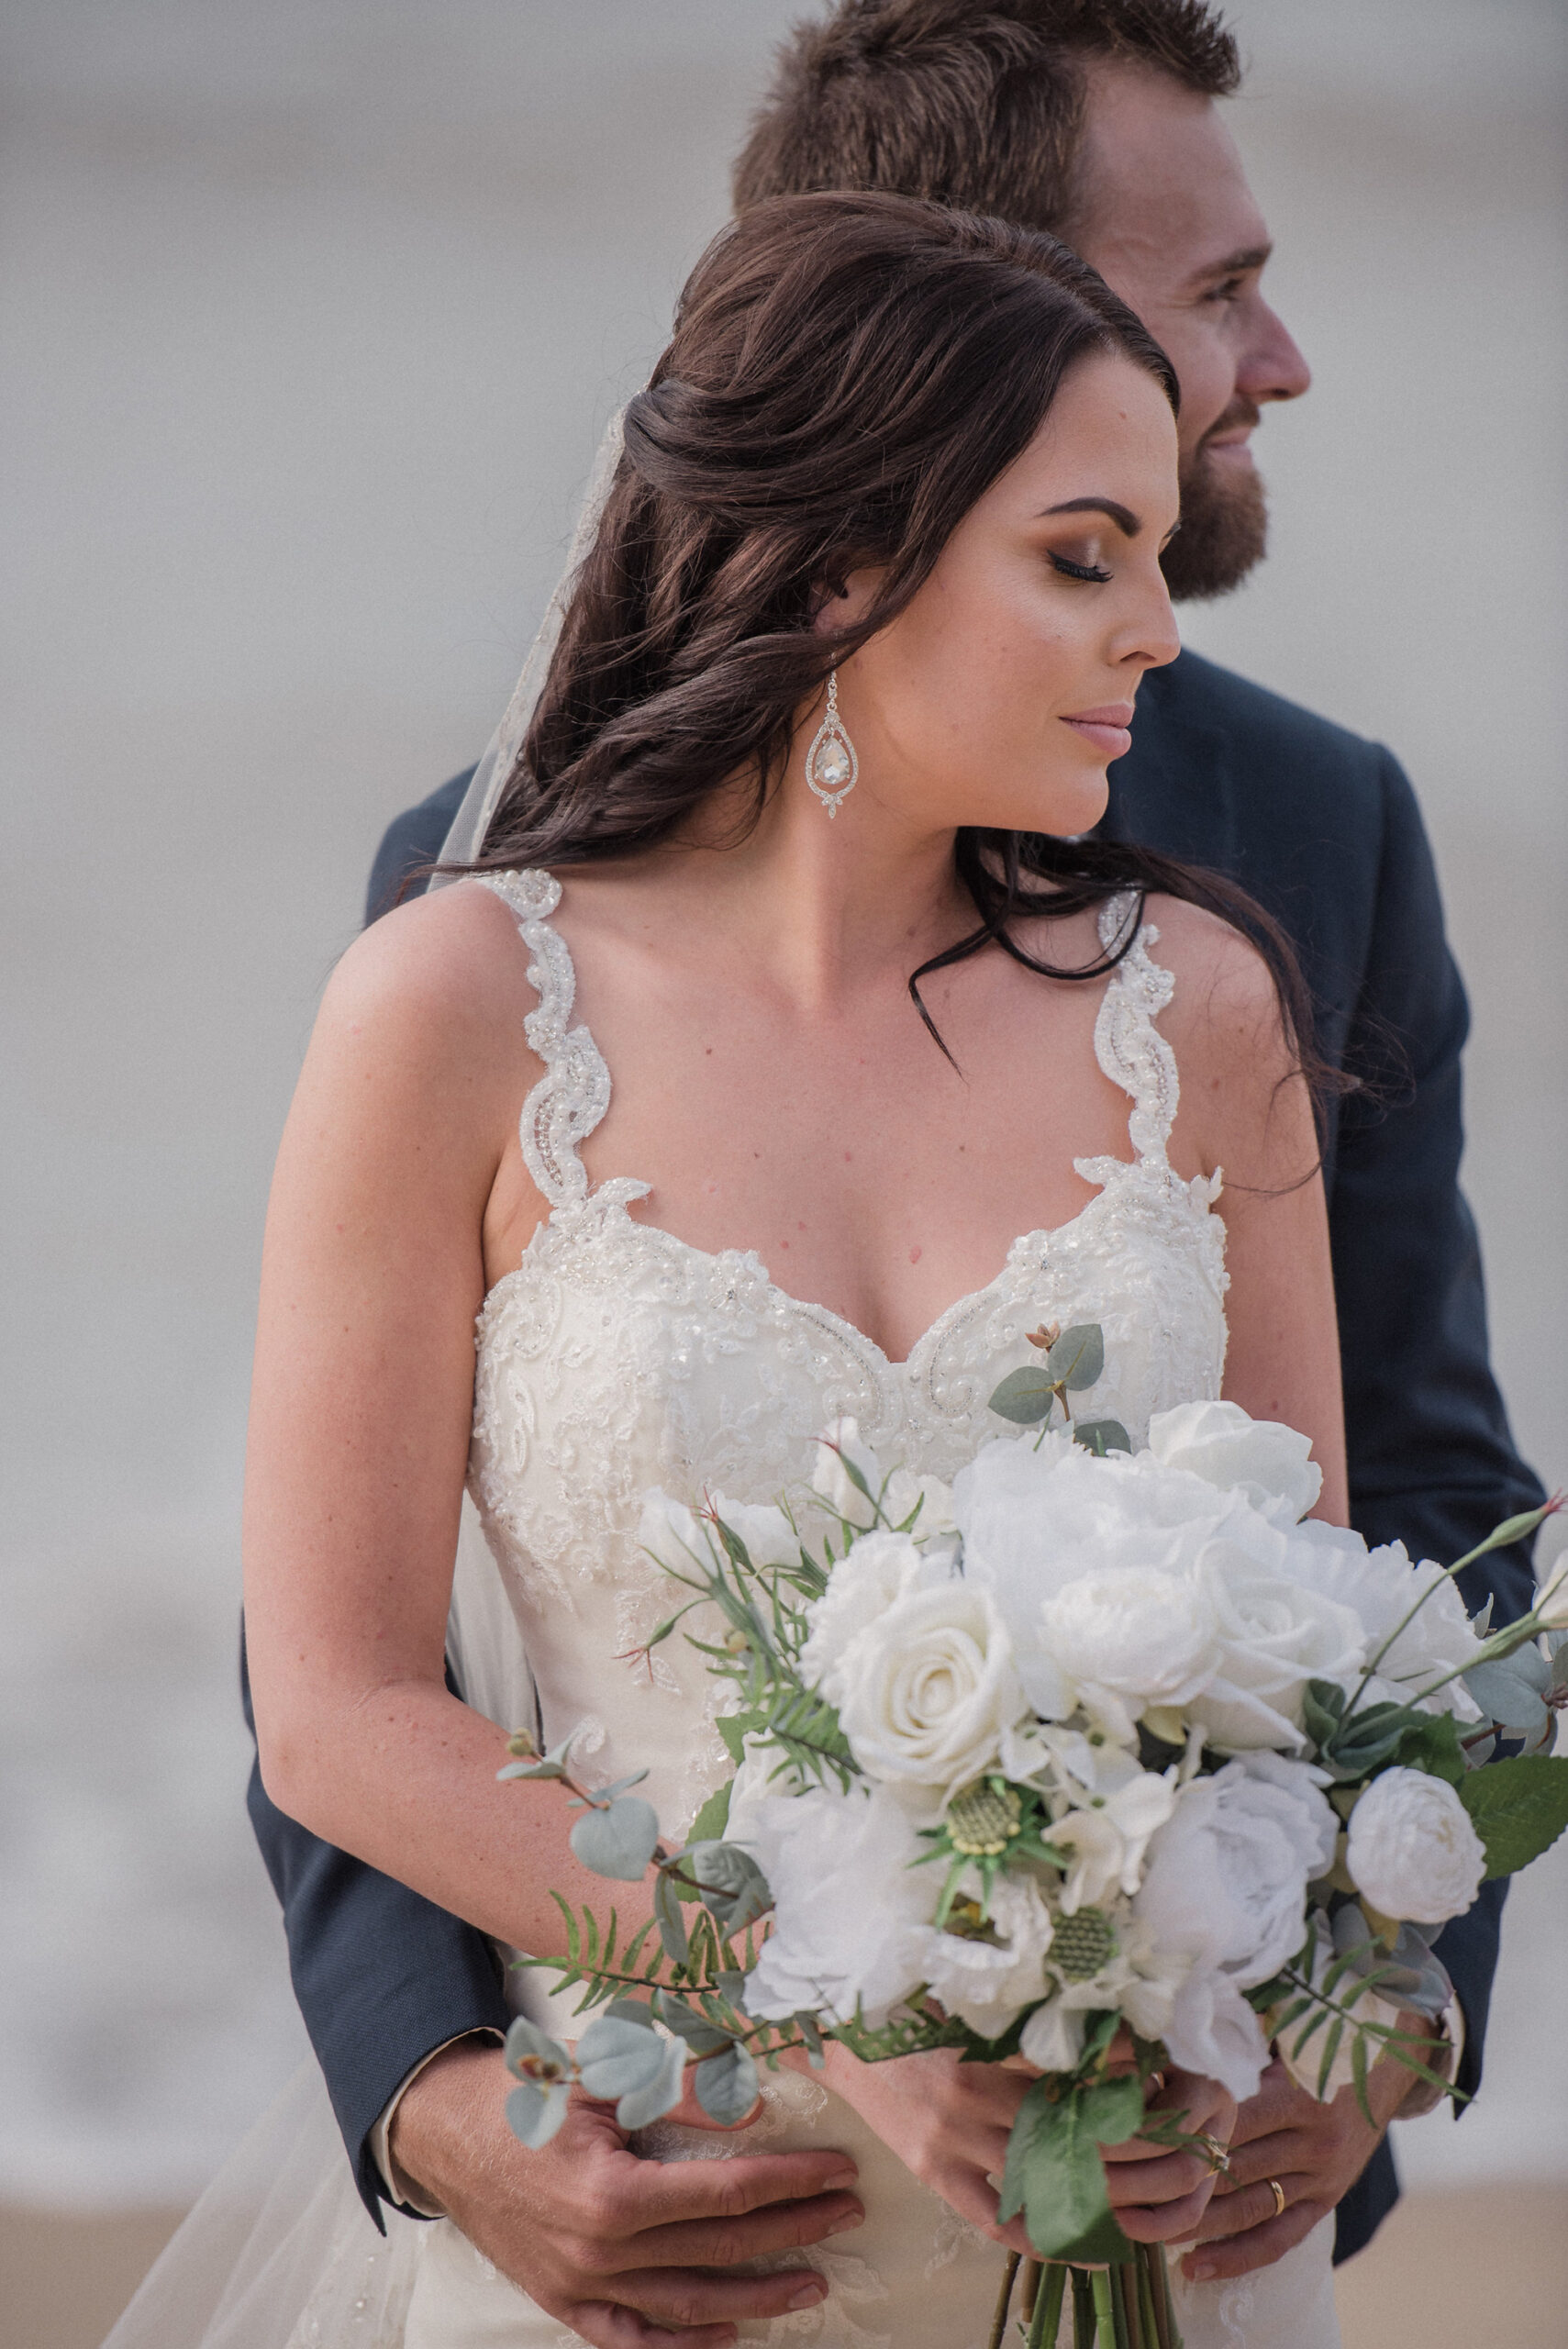 April Conor Classic Sea side Wedding Focus Imagery 017 scaled